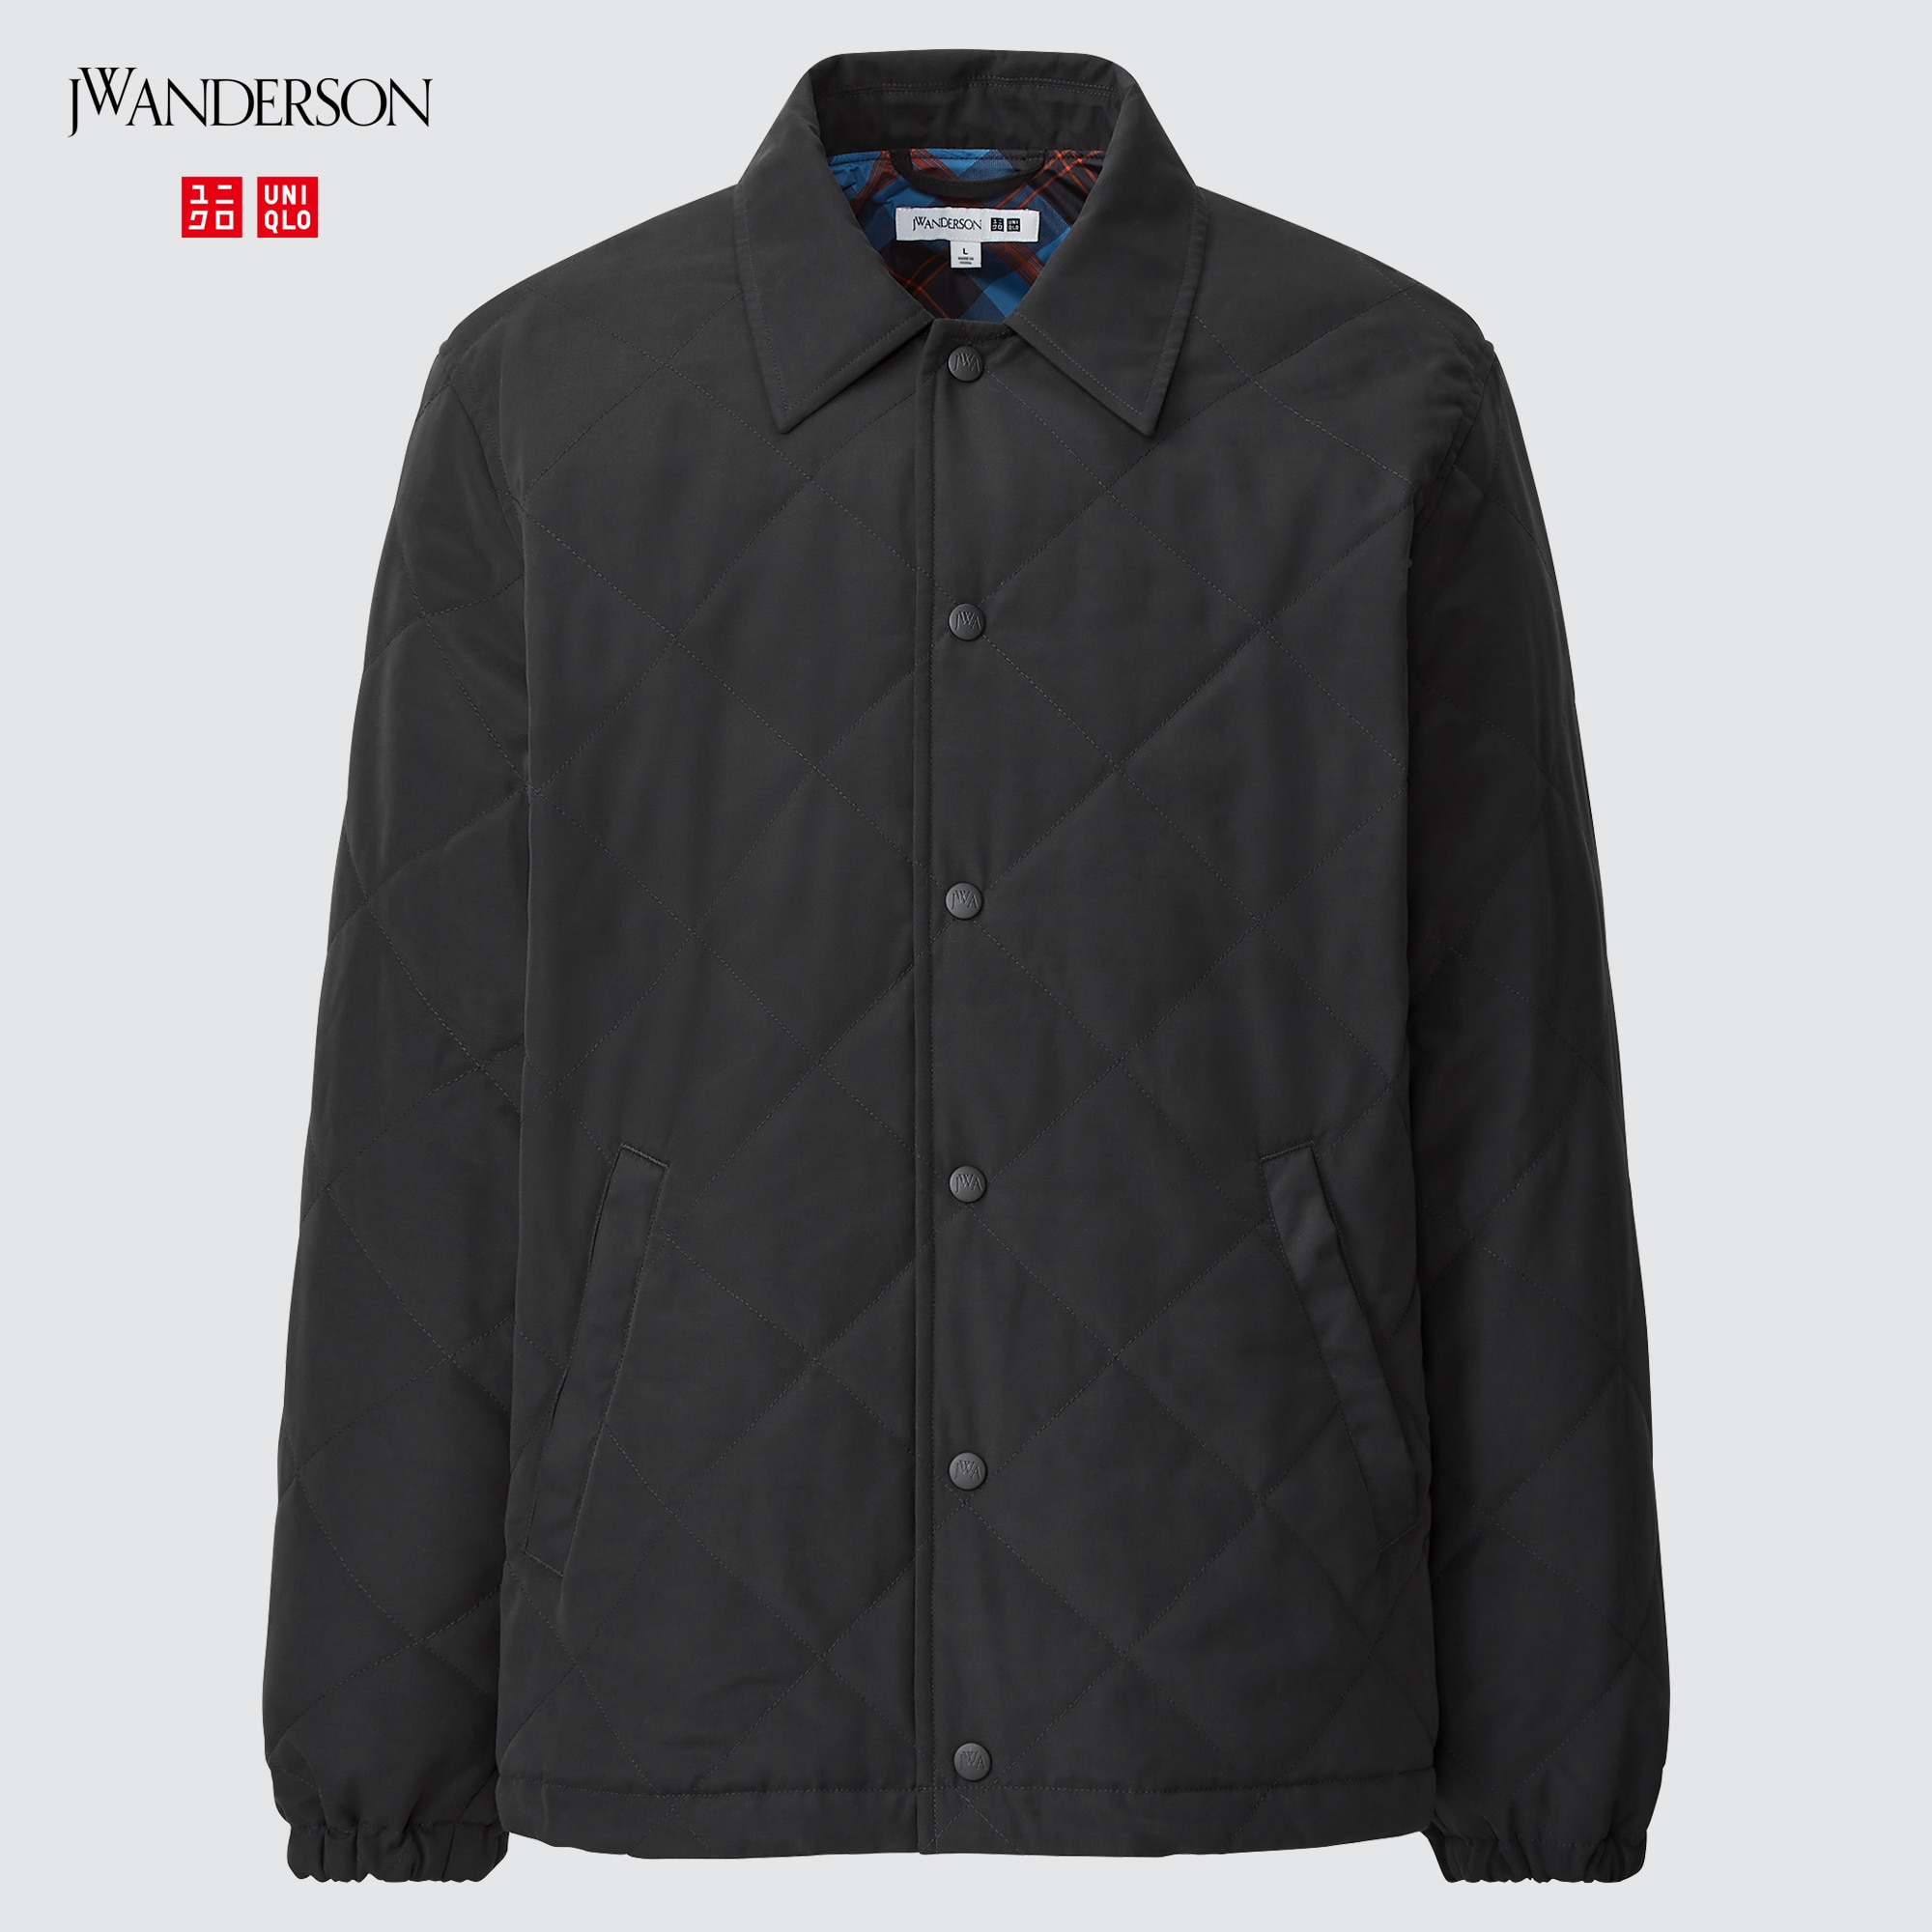 Lightweight uniqlo coach jacket black Mens Fashion Tops  Sets Formal  Shirts on Carousell